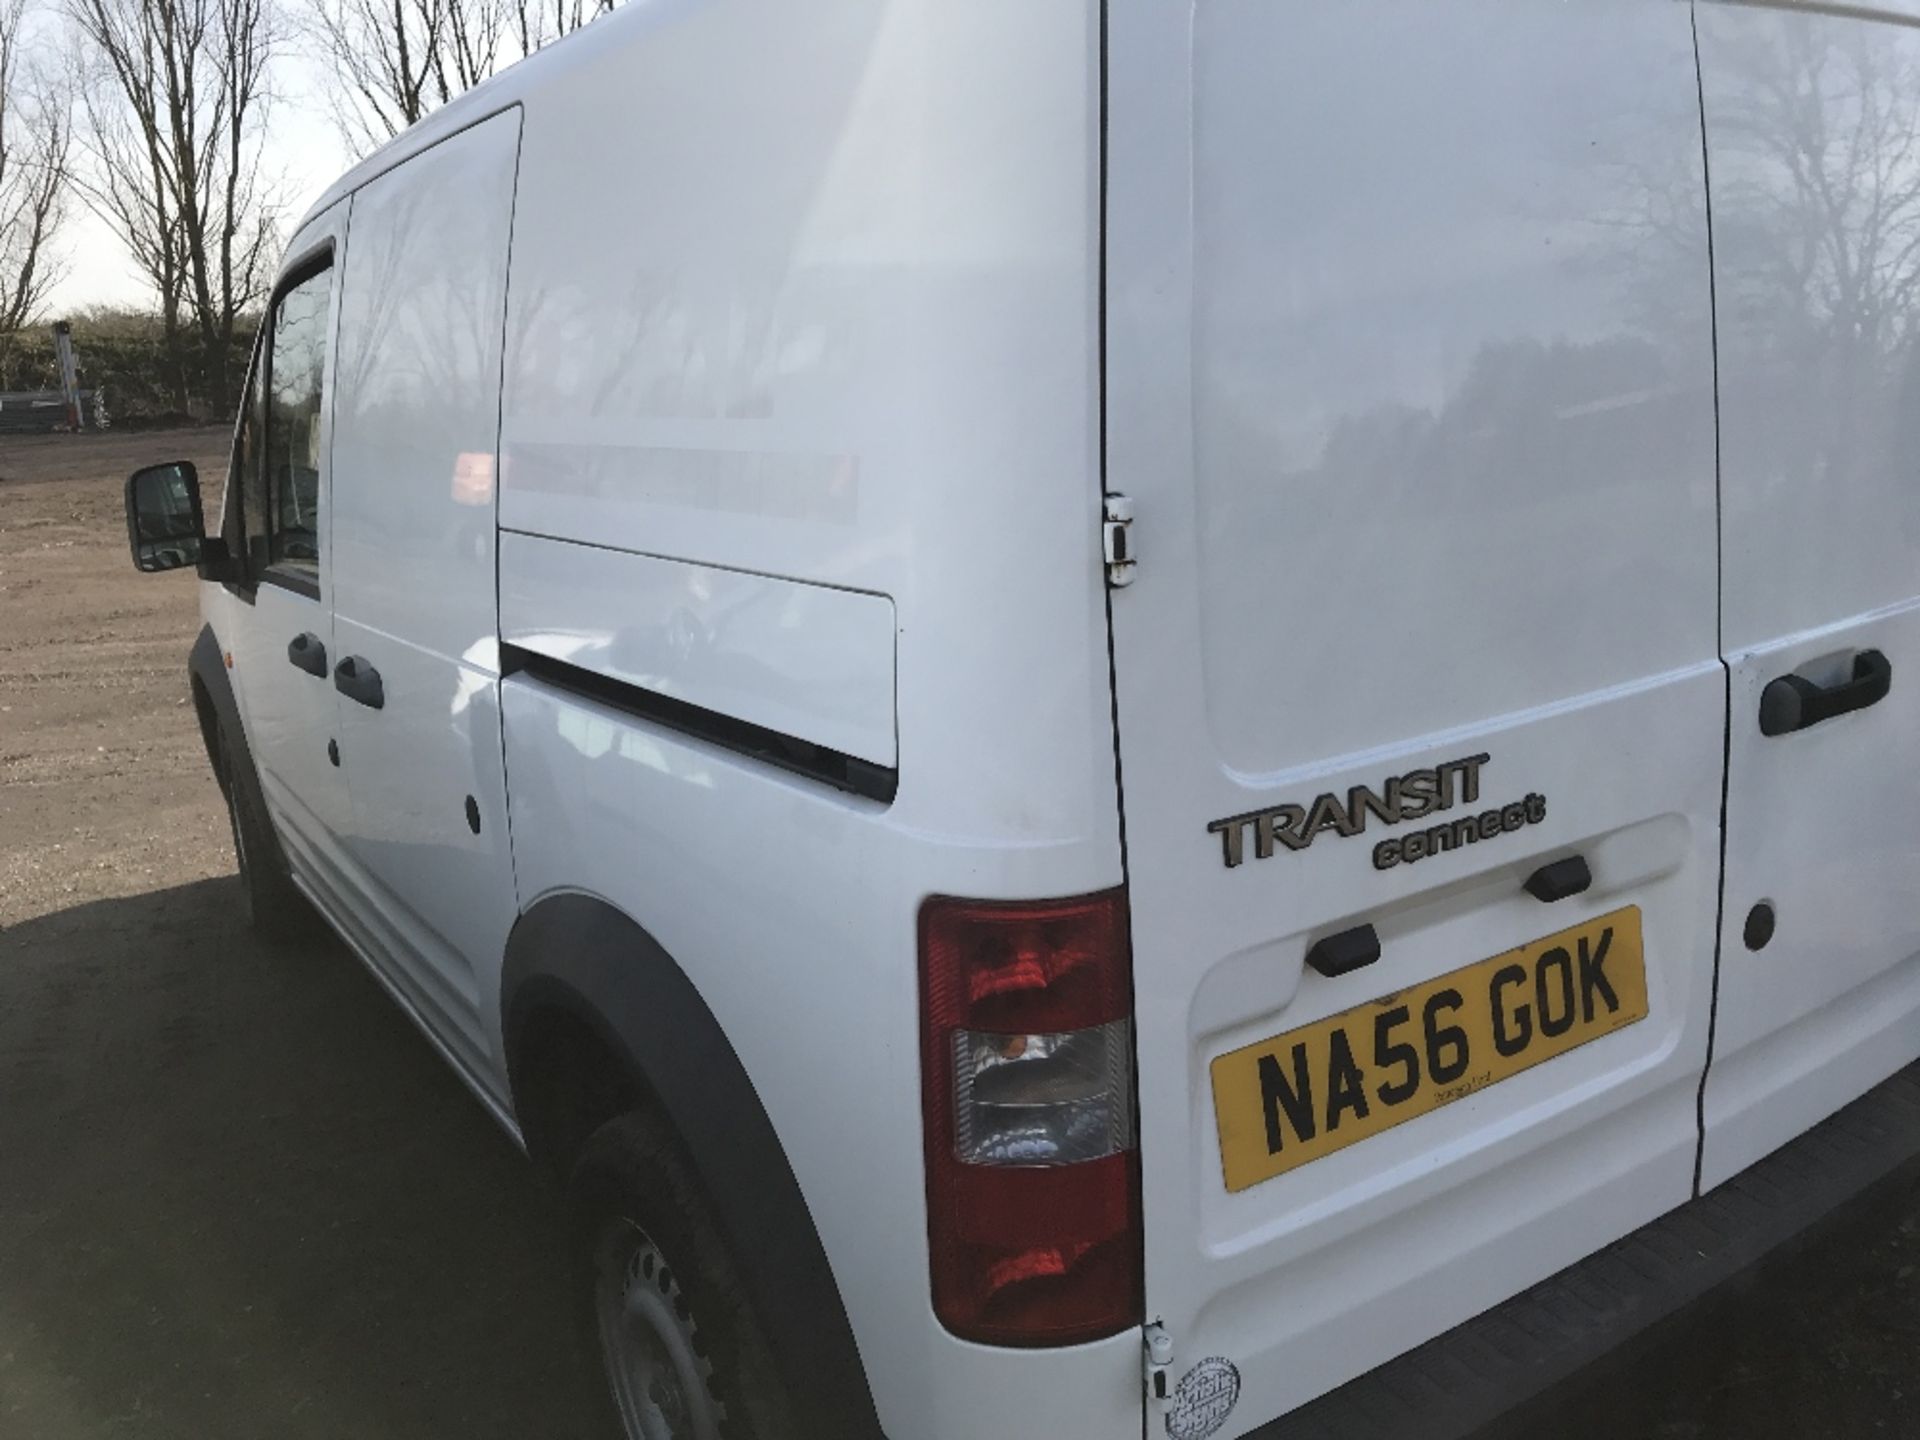 FORD TRANSIT CONNECT PANEL VAN REG:NA56 GOK 100,247 REC MILES WHEN TESTED WAS SEEN TO RUN, DRIVE, - Image 7 of 7